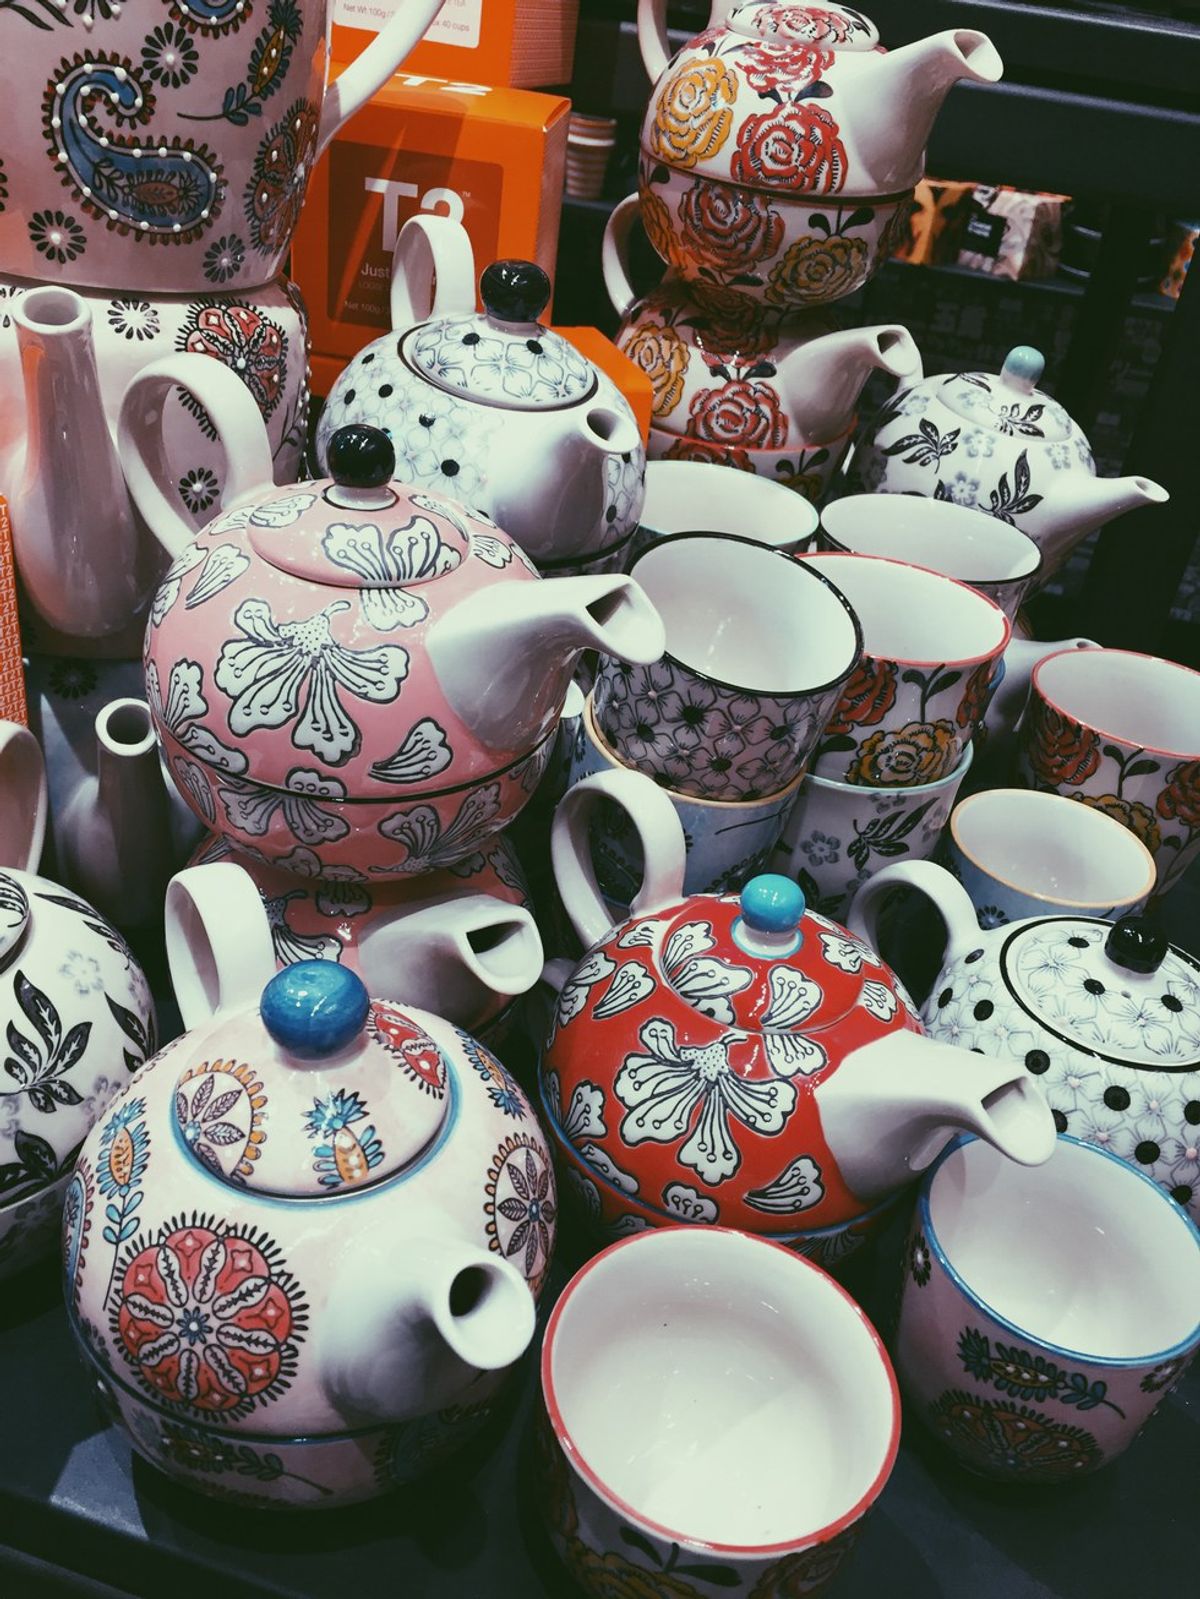 10 Things Every Obsessive Tea Drinker Can Relate To